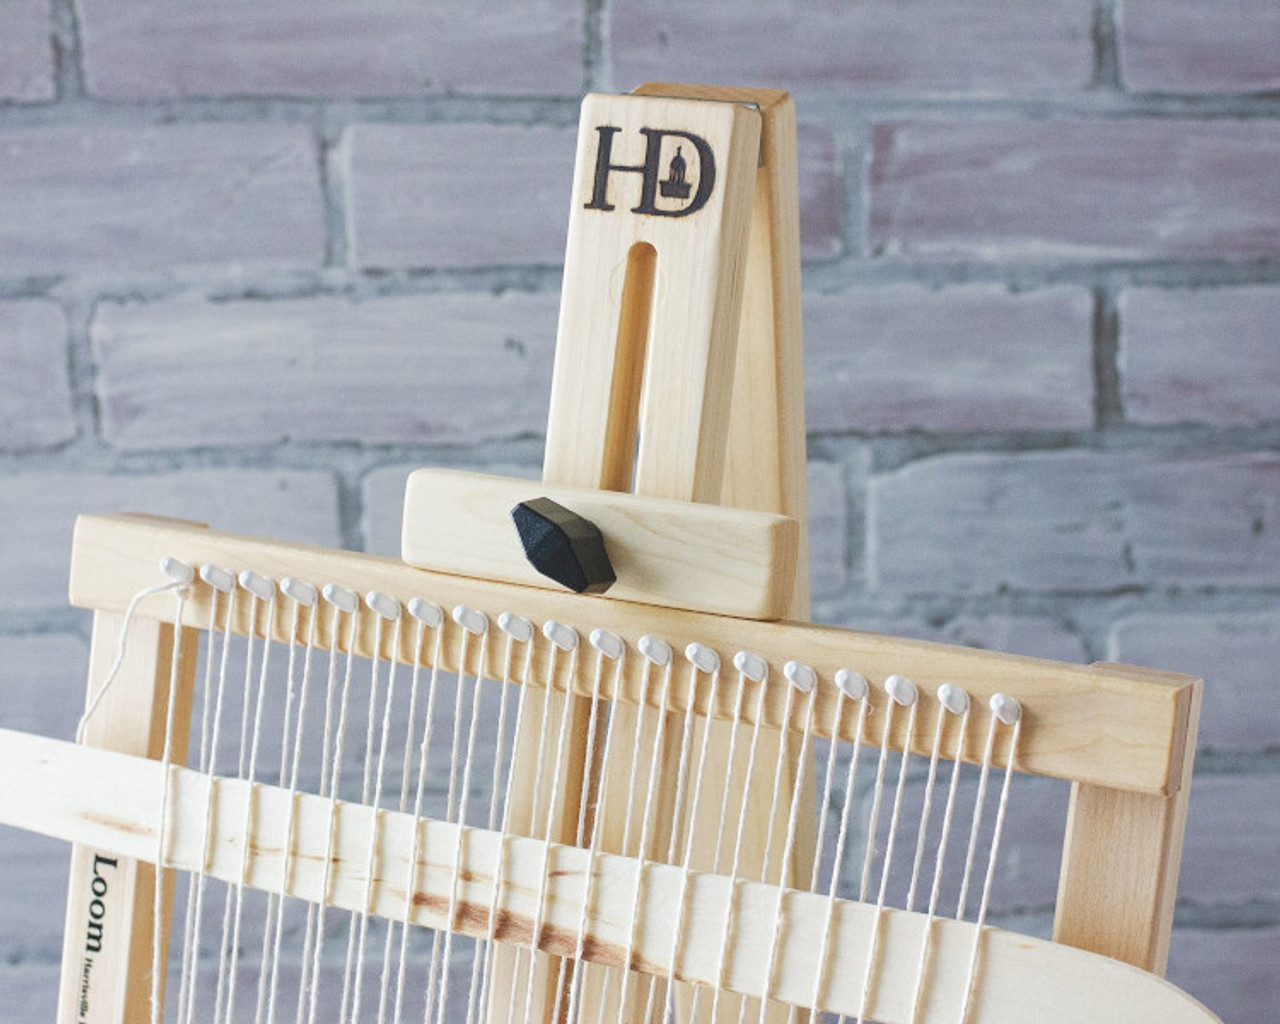 Friendly Loom Tapestry Weaving Stand